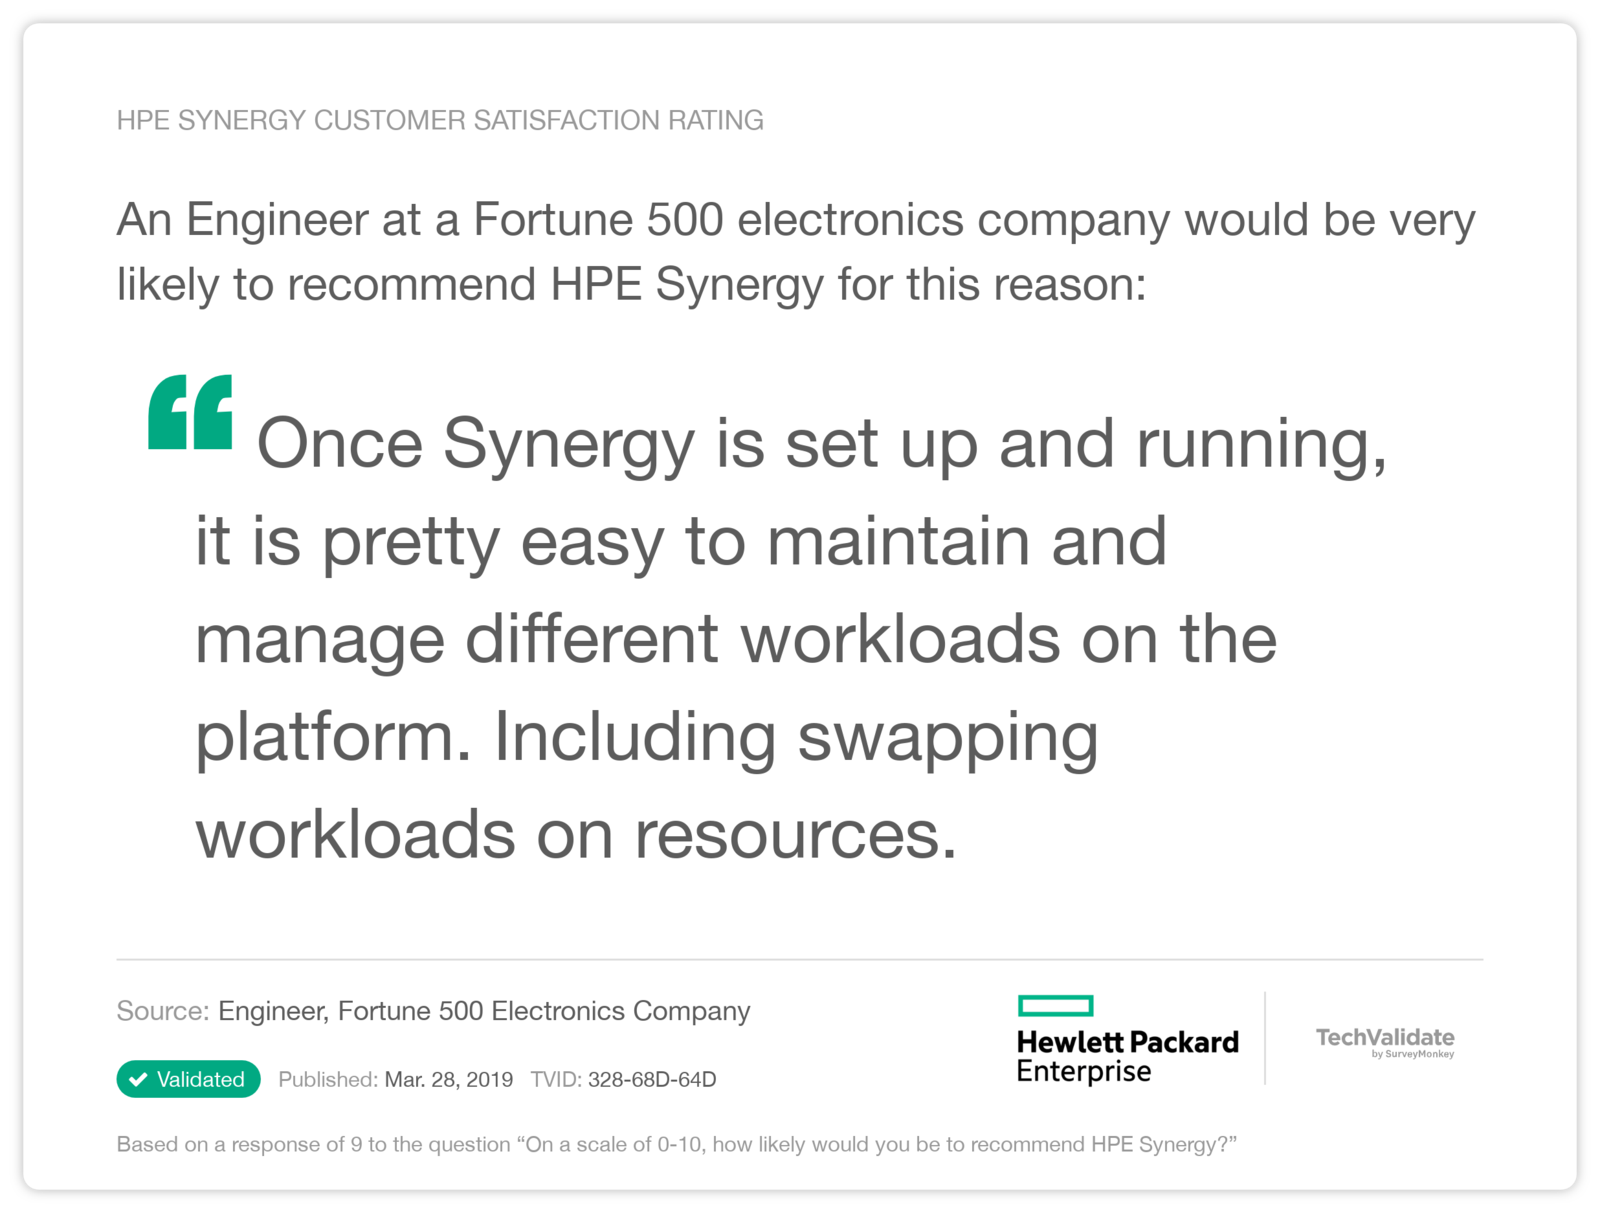 HPE Synergy Customer Satisfaction Rating